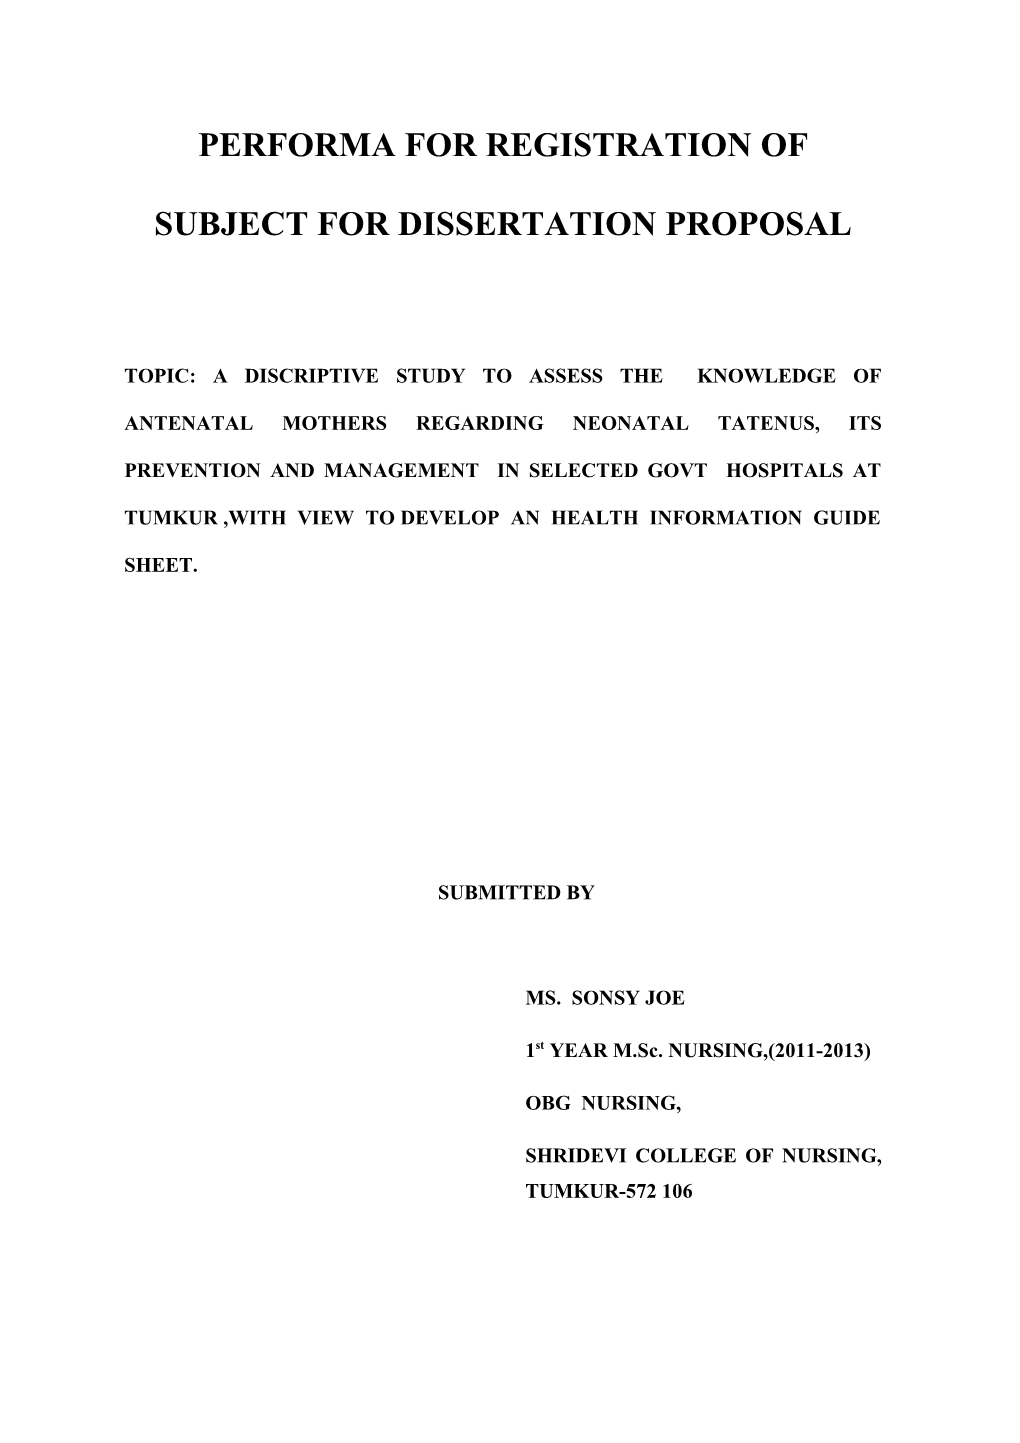 Performa for Registration of Subject for Dissertation Proposal